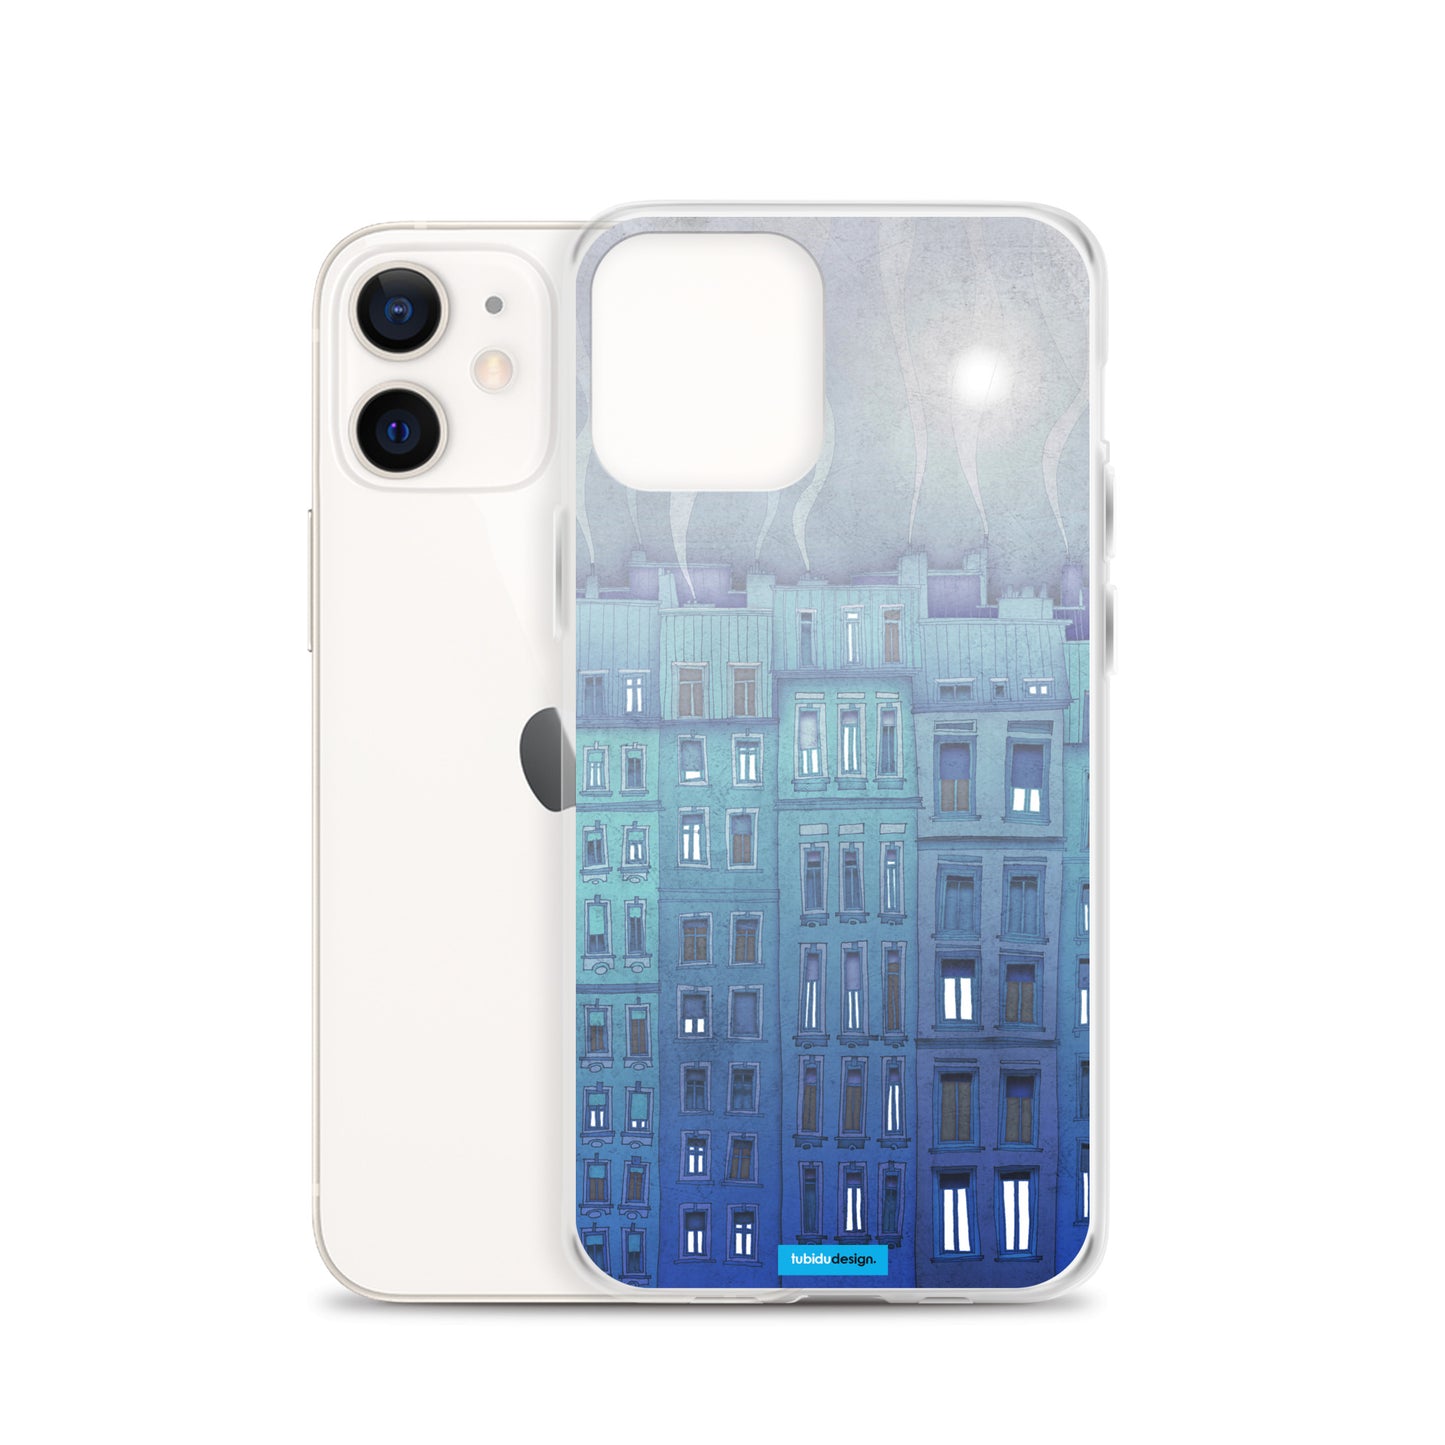 Foggy day in Paris - Illustrated iPhone Case